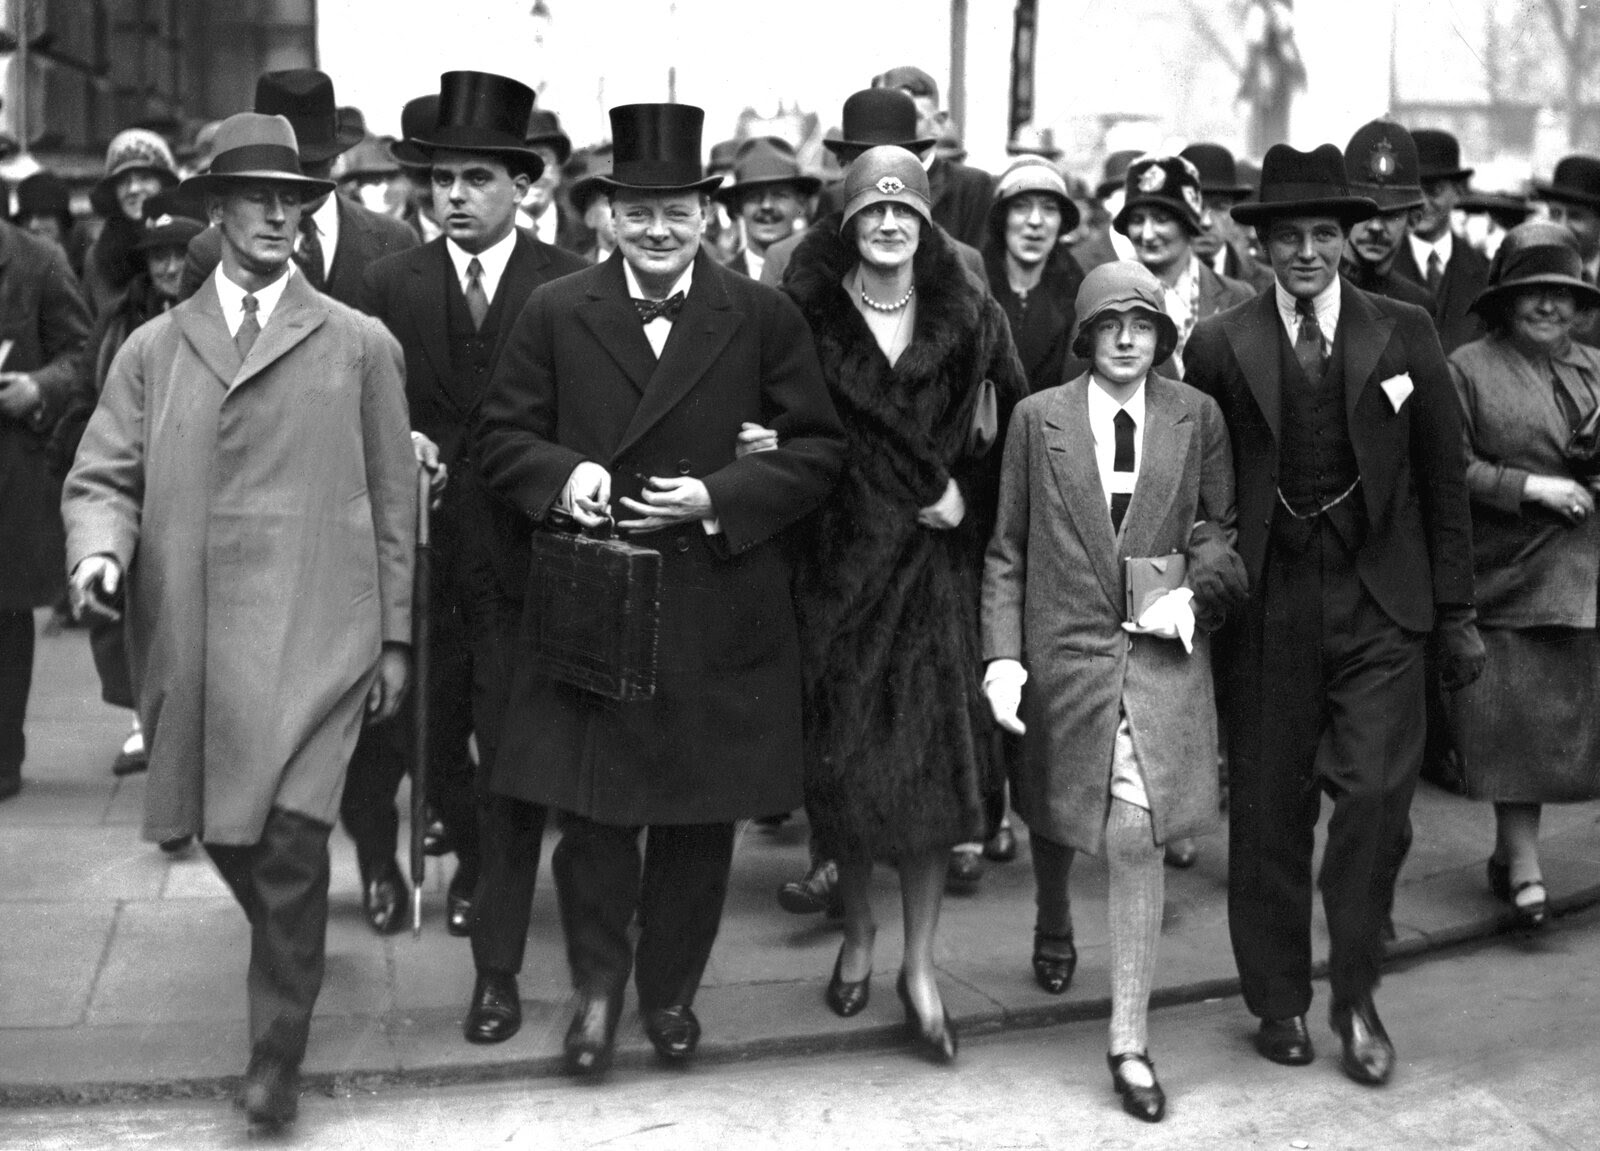 The Churchills — Winston, Clementine and two of the their children, Sarah and Randolph — head to the House of Commons on Budget Day, April 15, 1929.